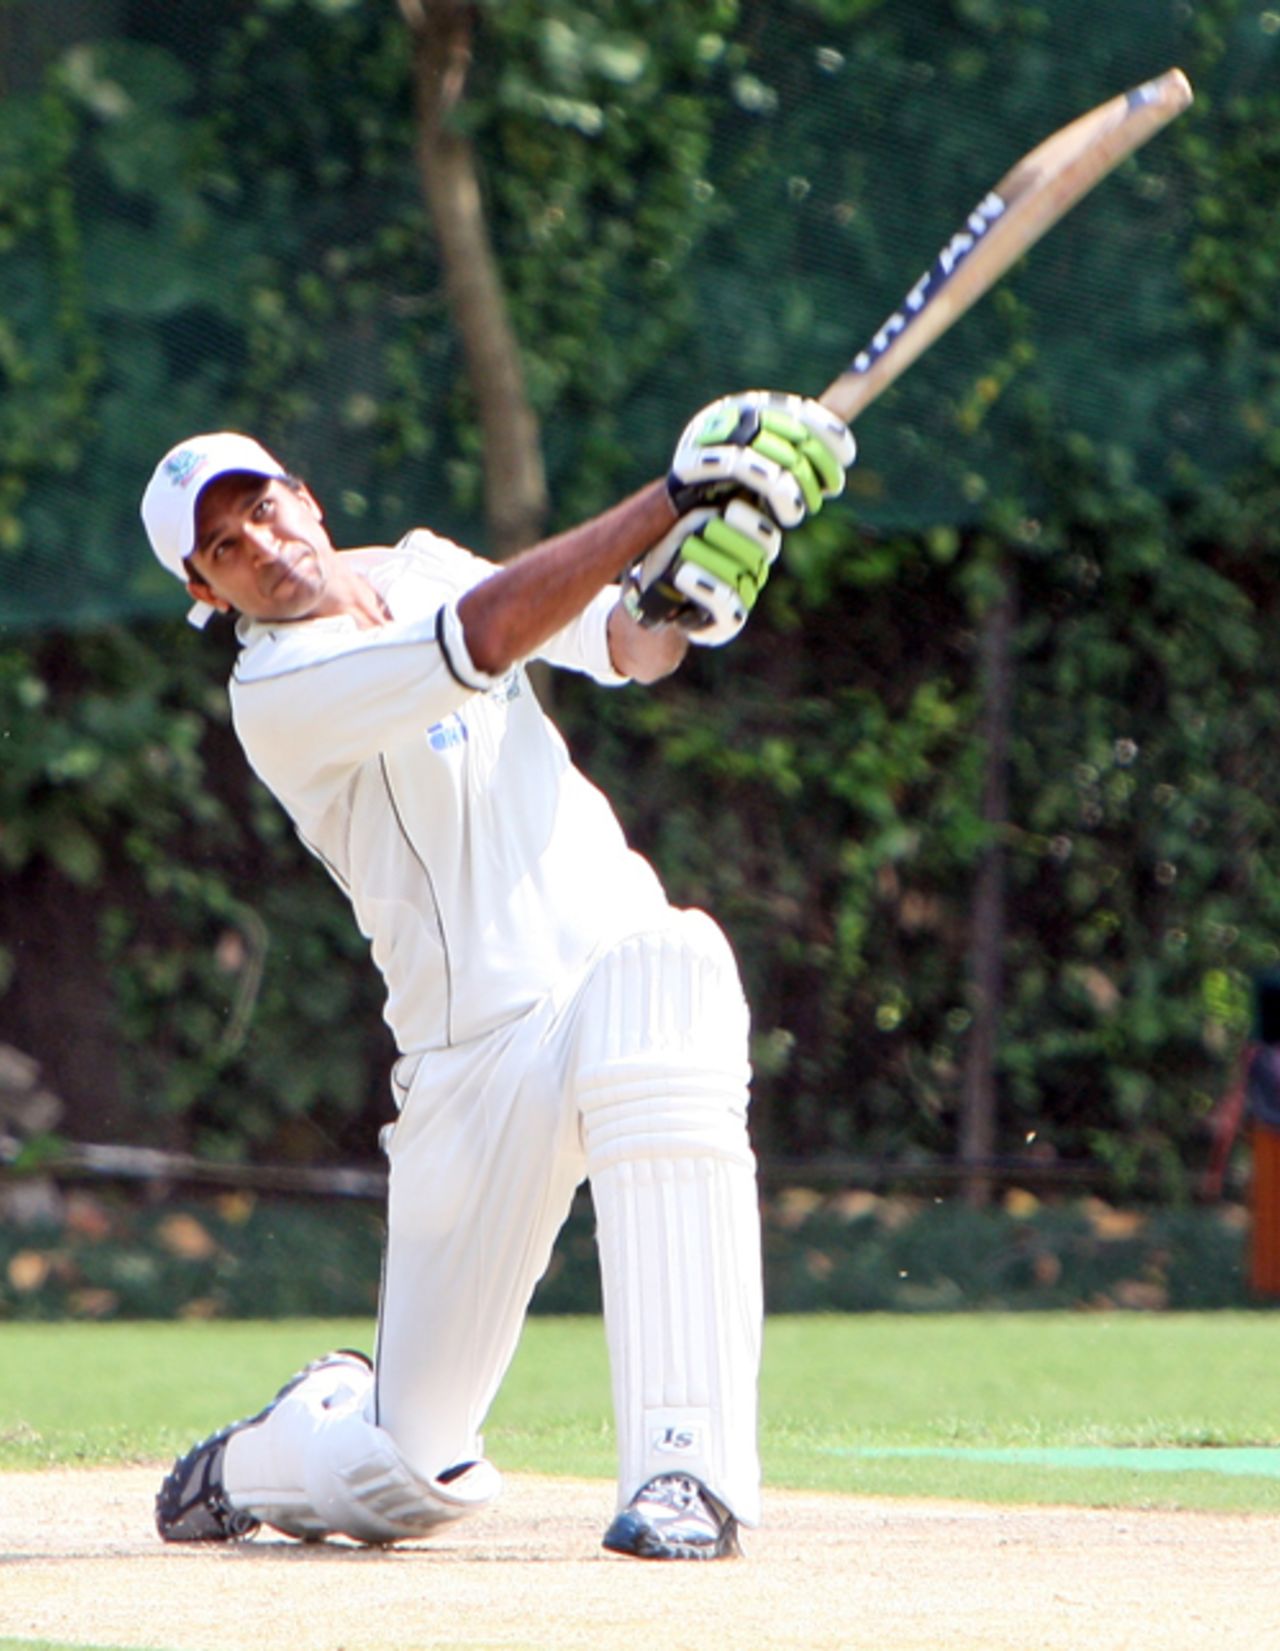 Tanwir Afzal hit 8 sixes in his innings of 60 in the Saturday League Grand Final 